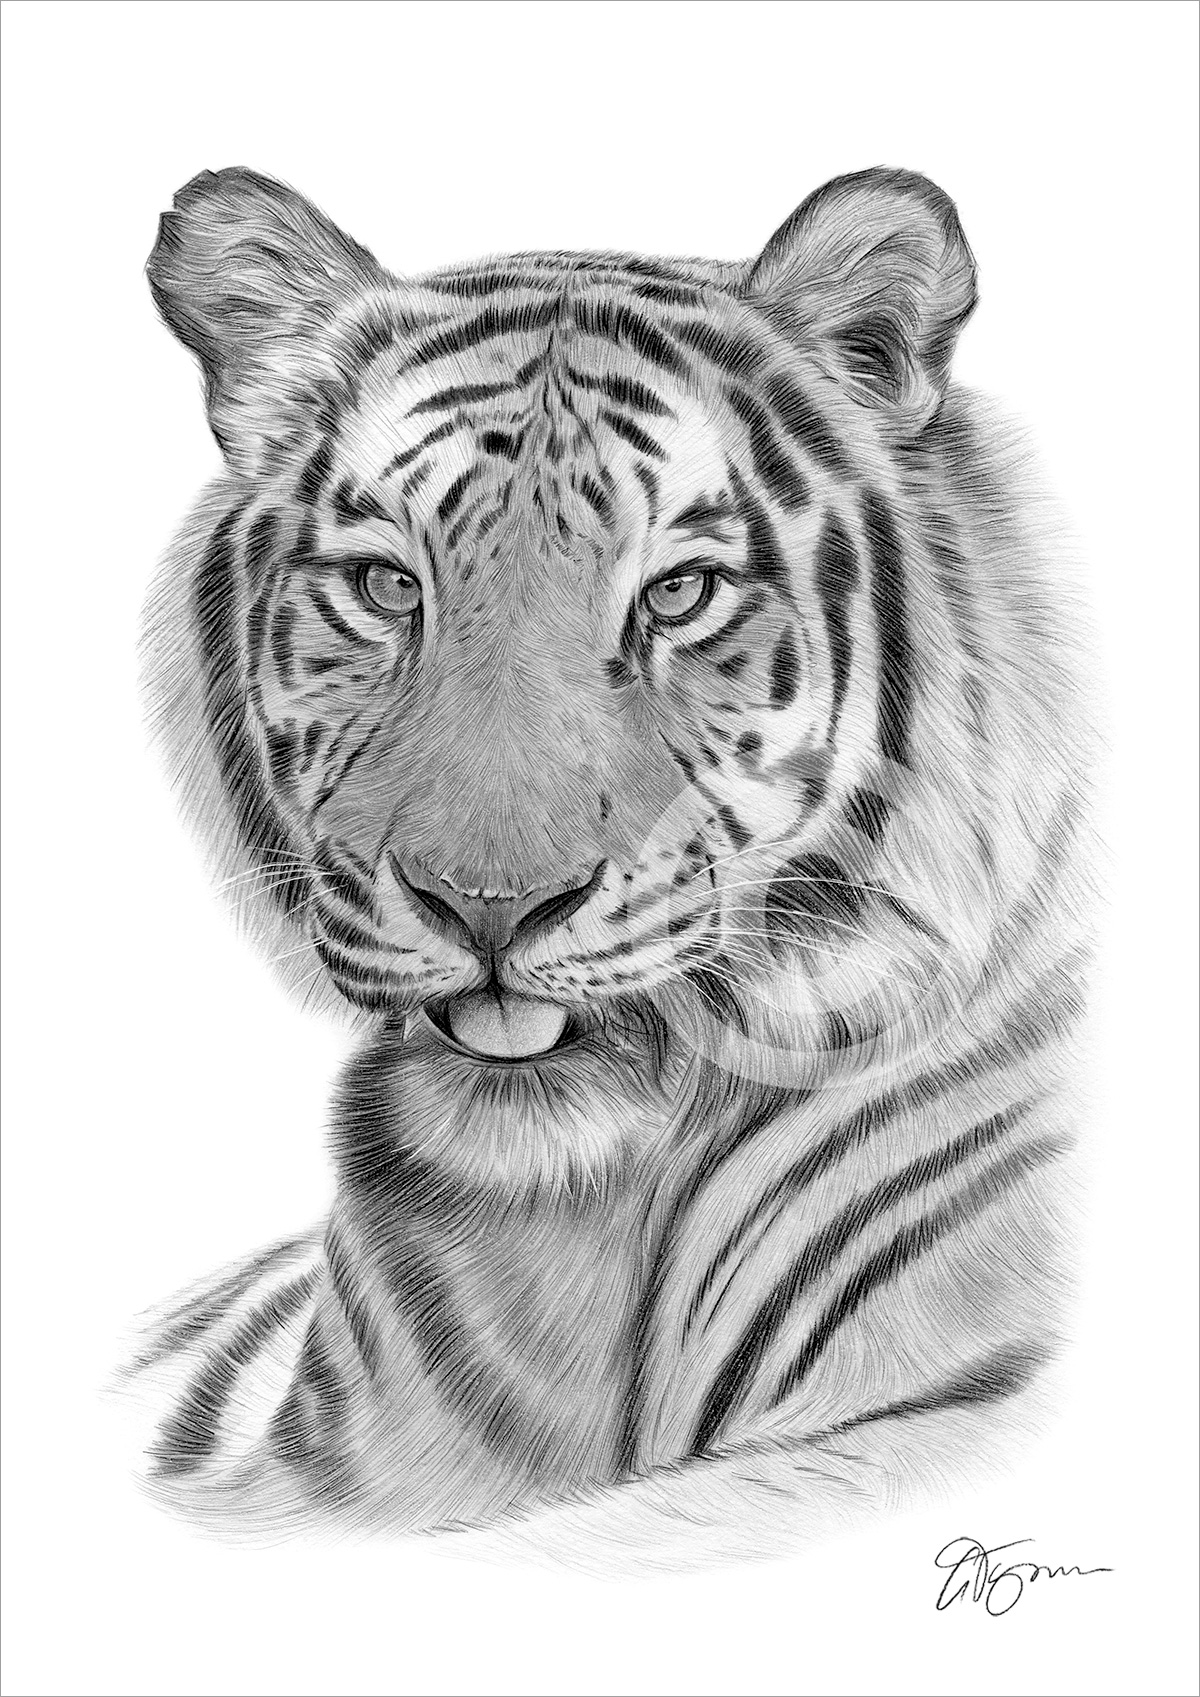 Pencil drawing of an adult Bengal tiger by artist Gary Tymon